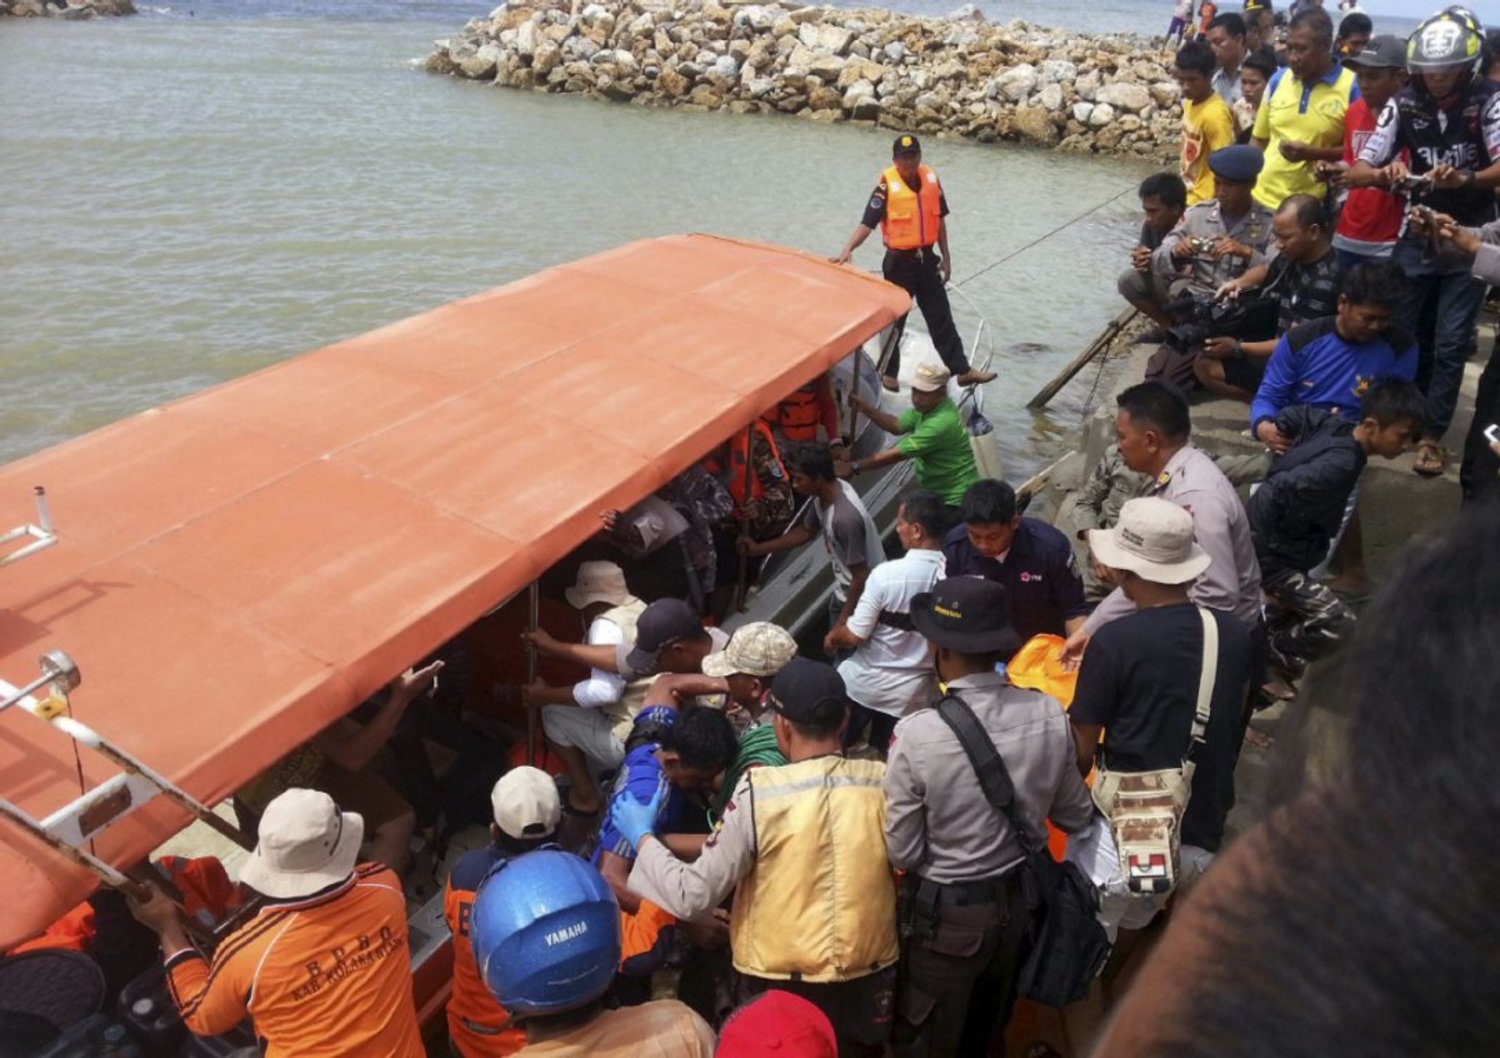 Eight people were killed when their boat sank off Indonesia’s Kalimantan island. (Reuters)